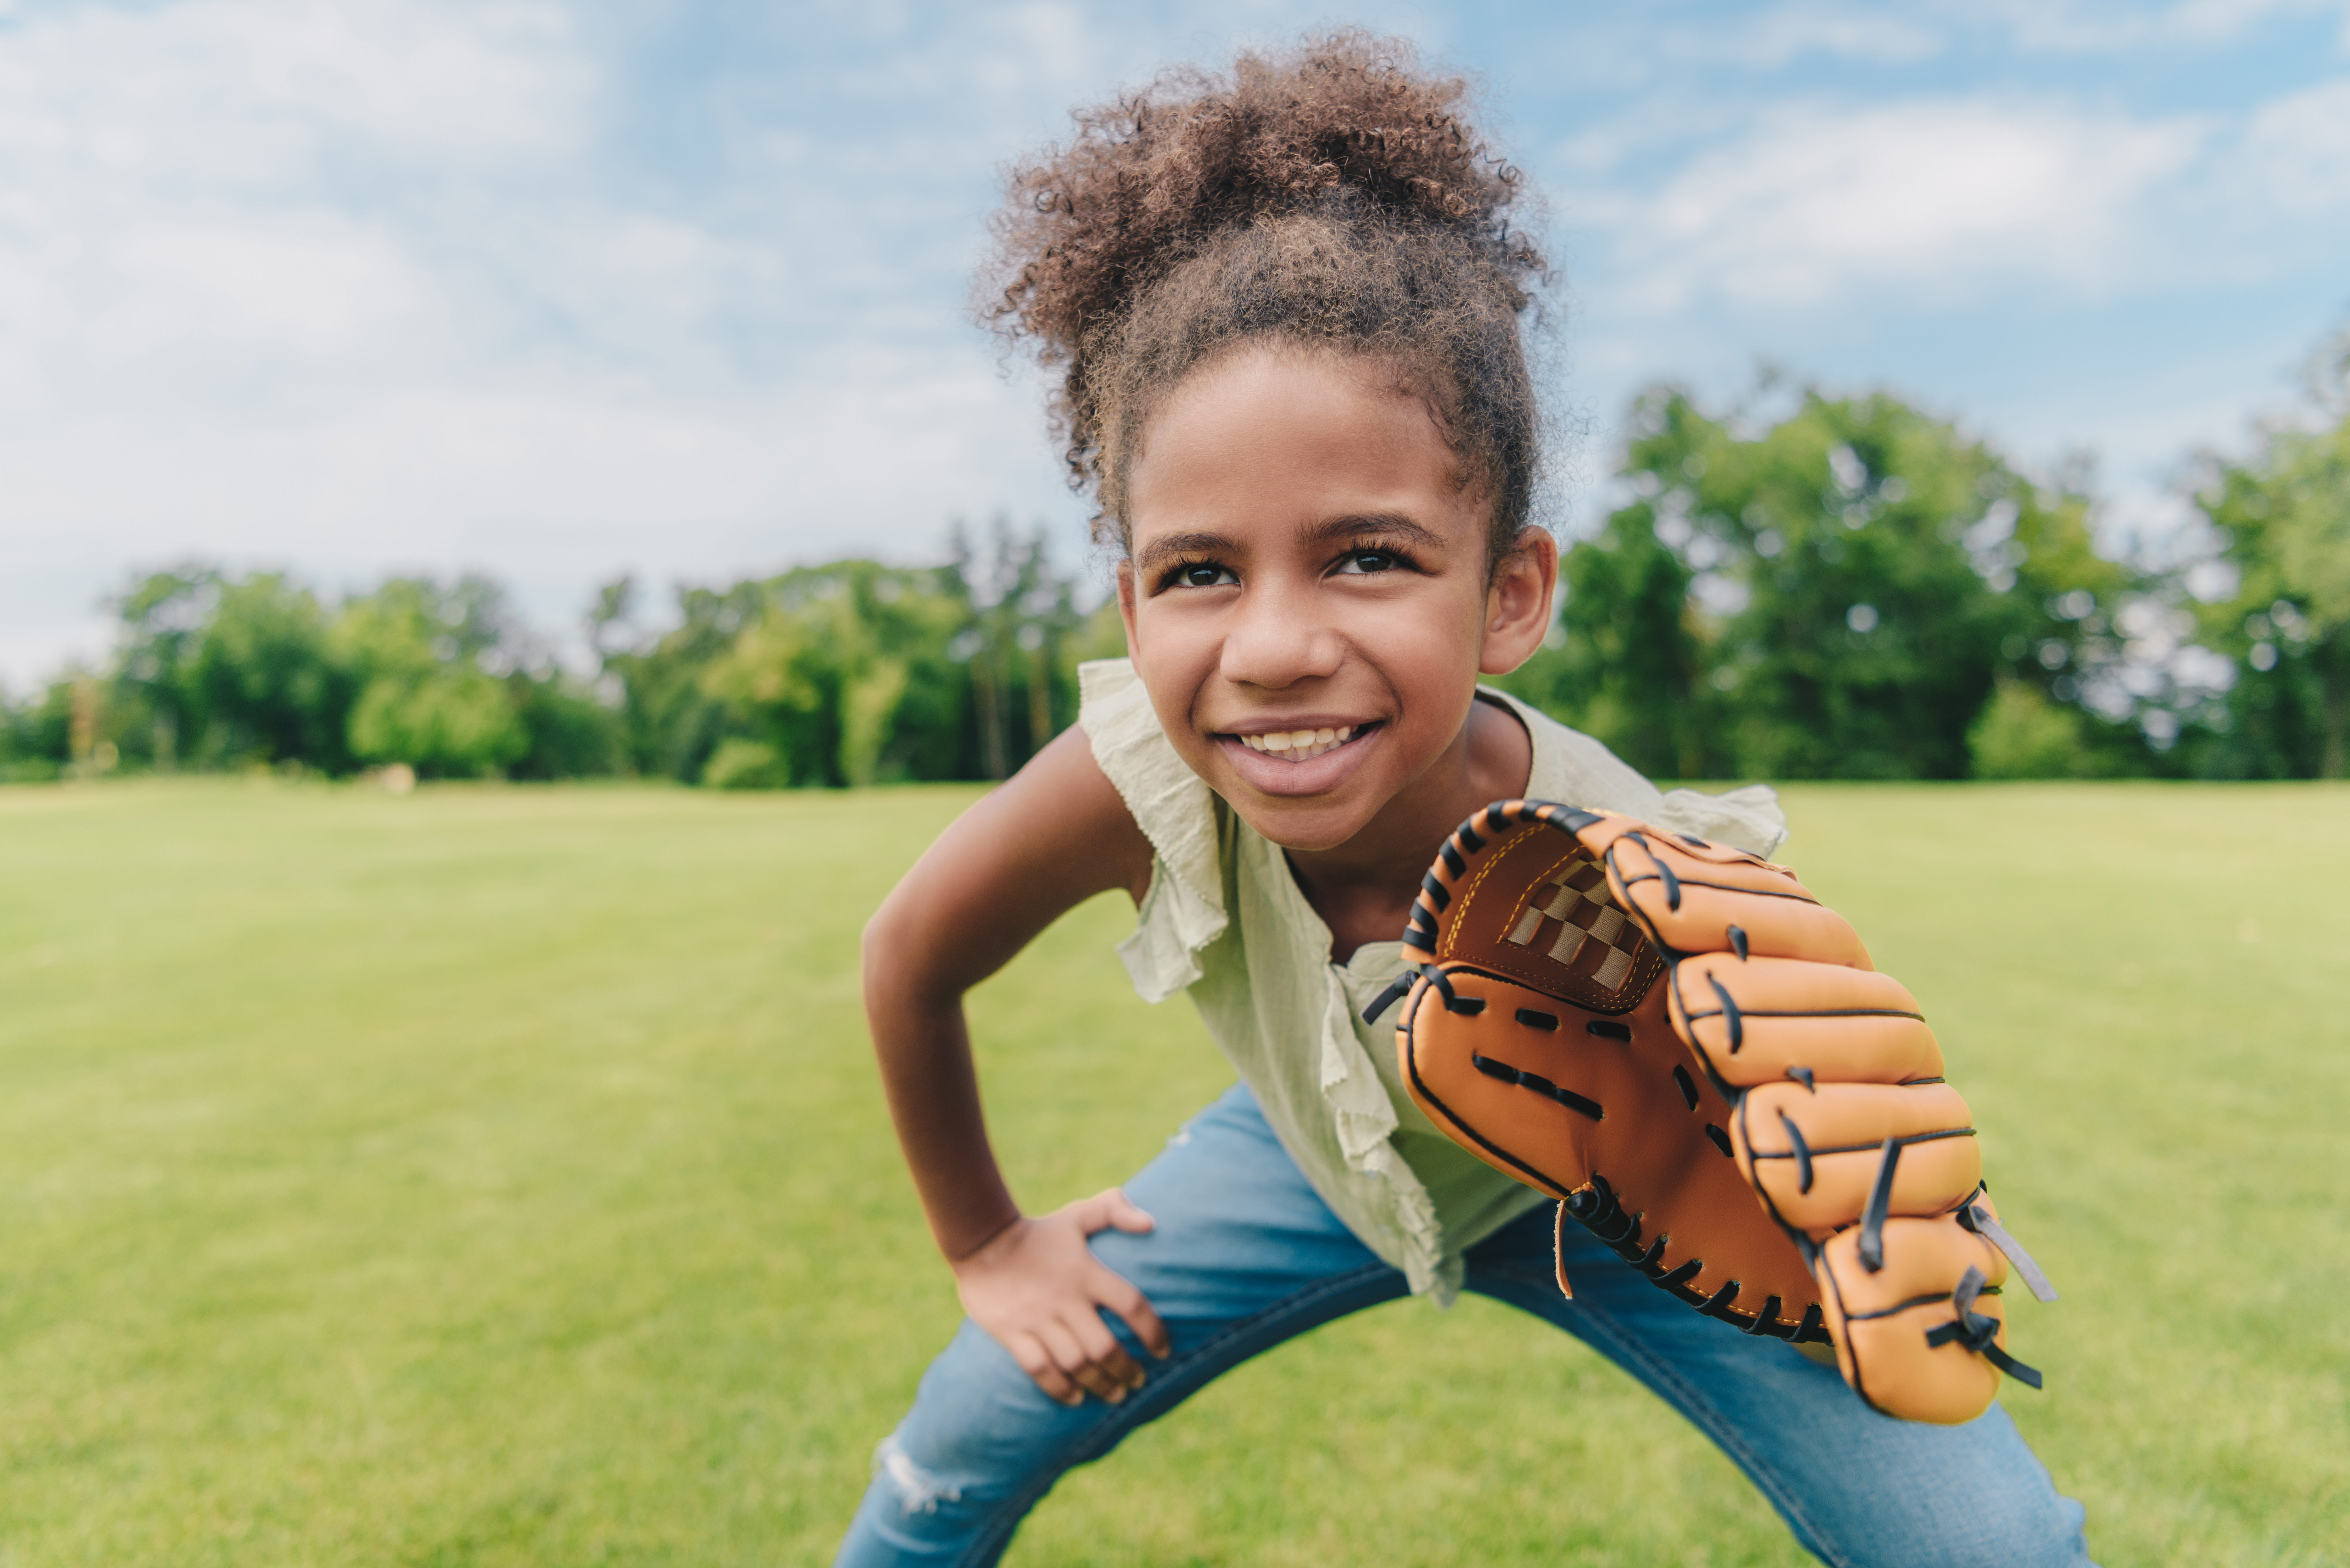 Adolescent girl holding a softball mitt playing in a field